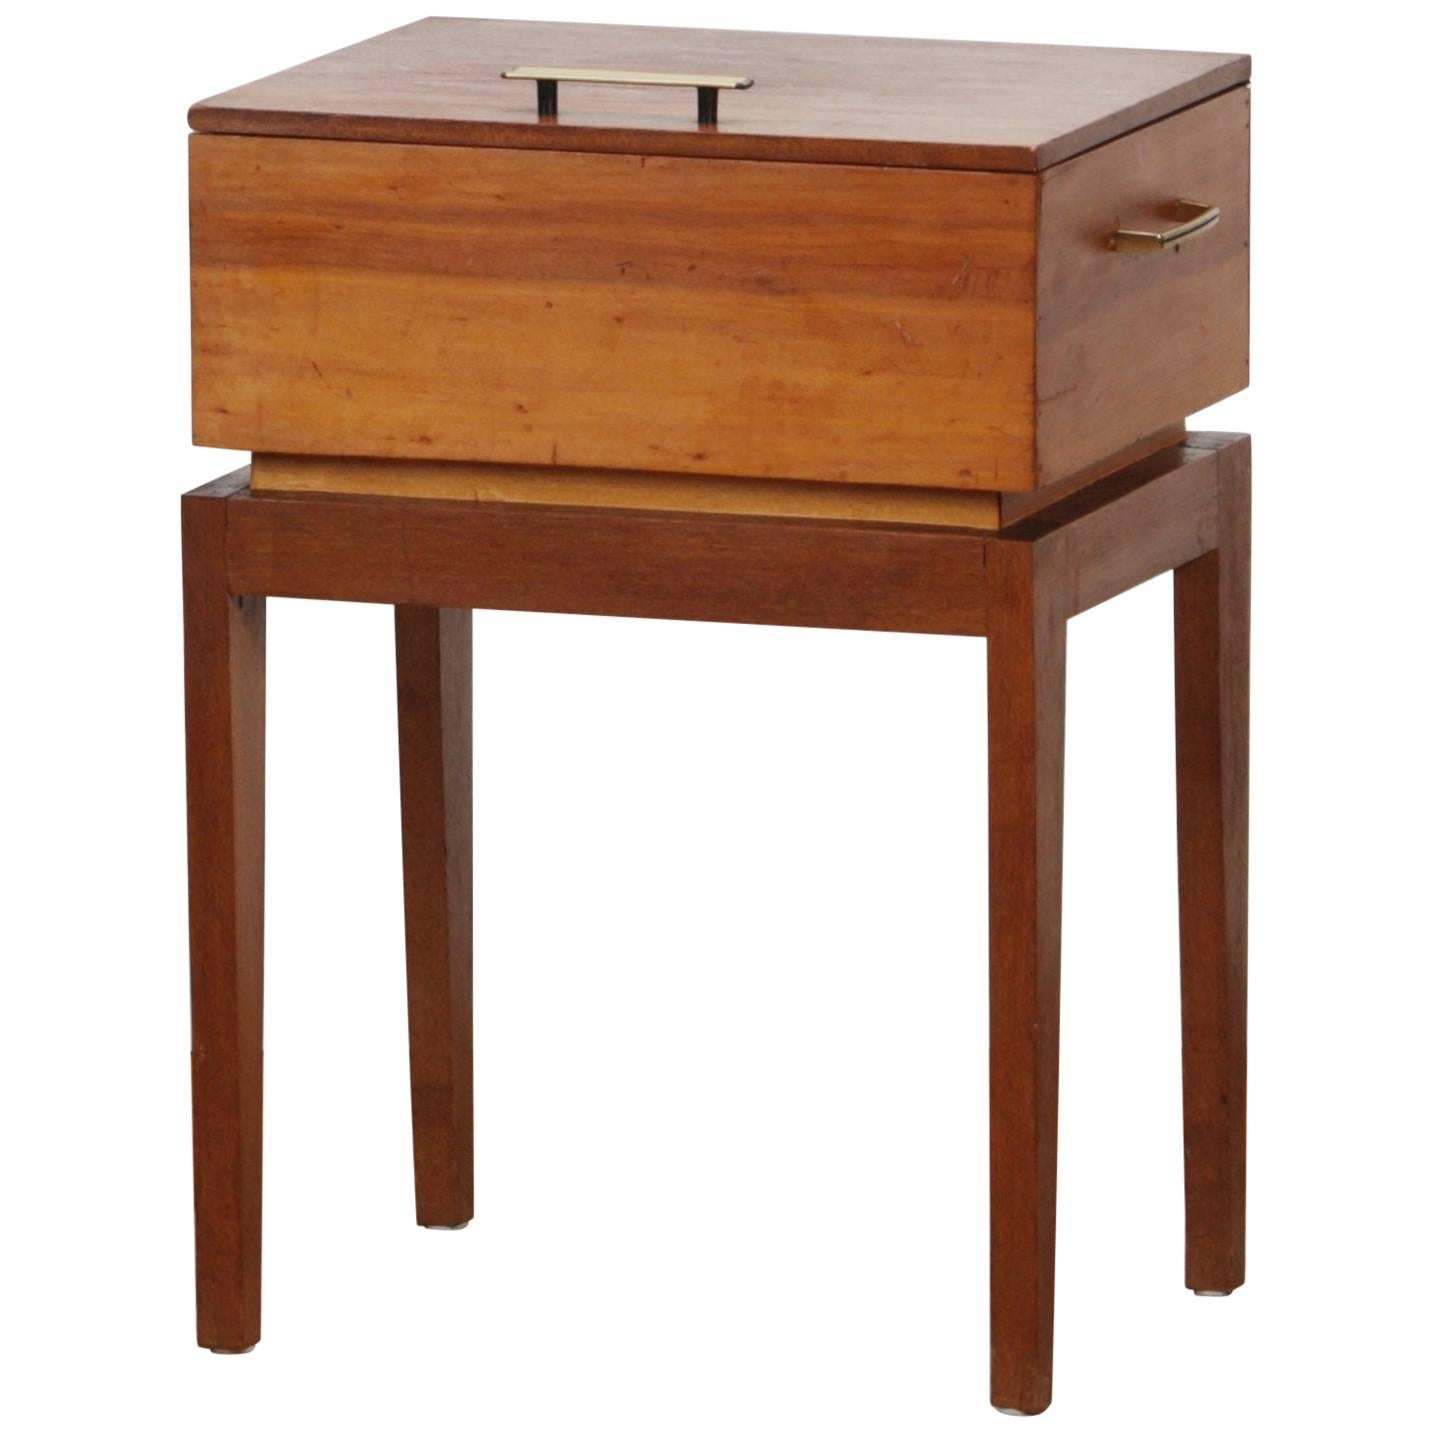 1950s, Teak and Pine Sewing, Side Table